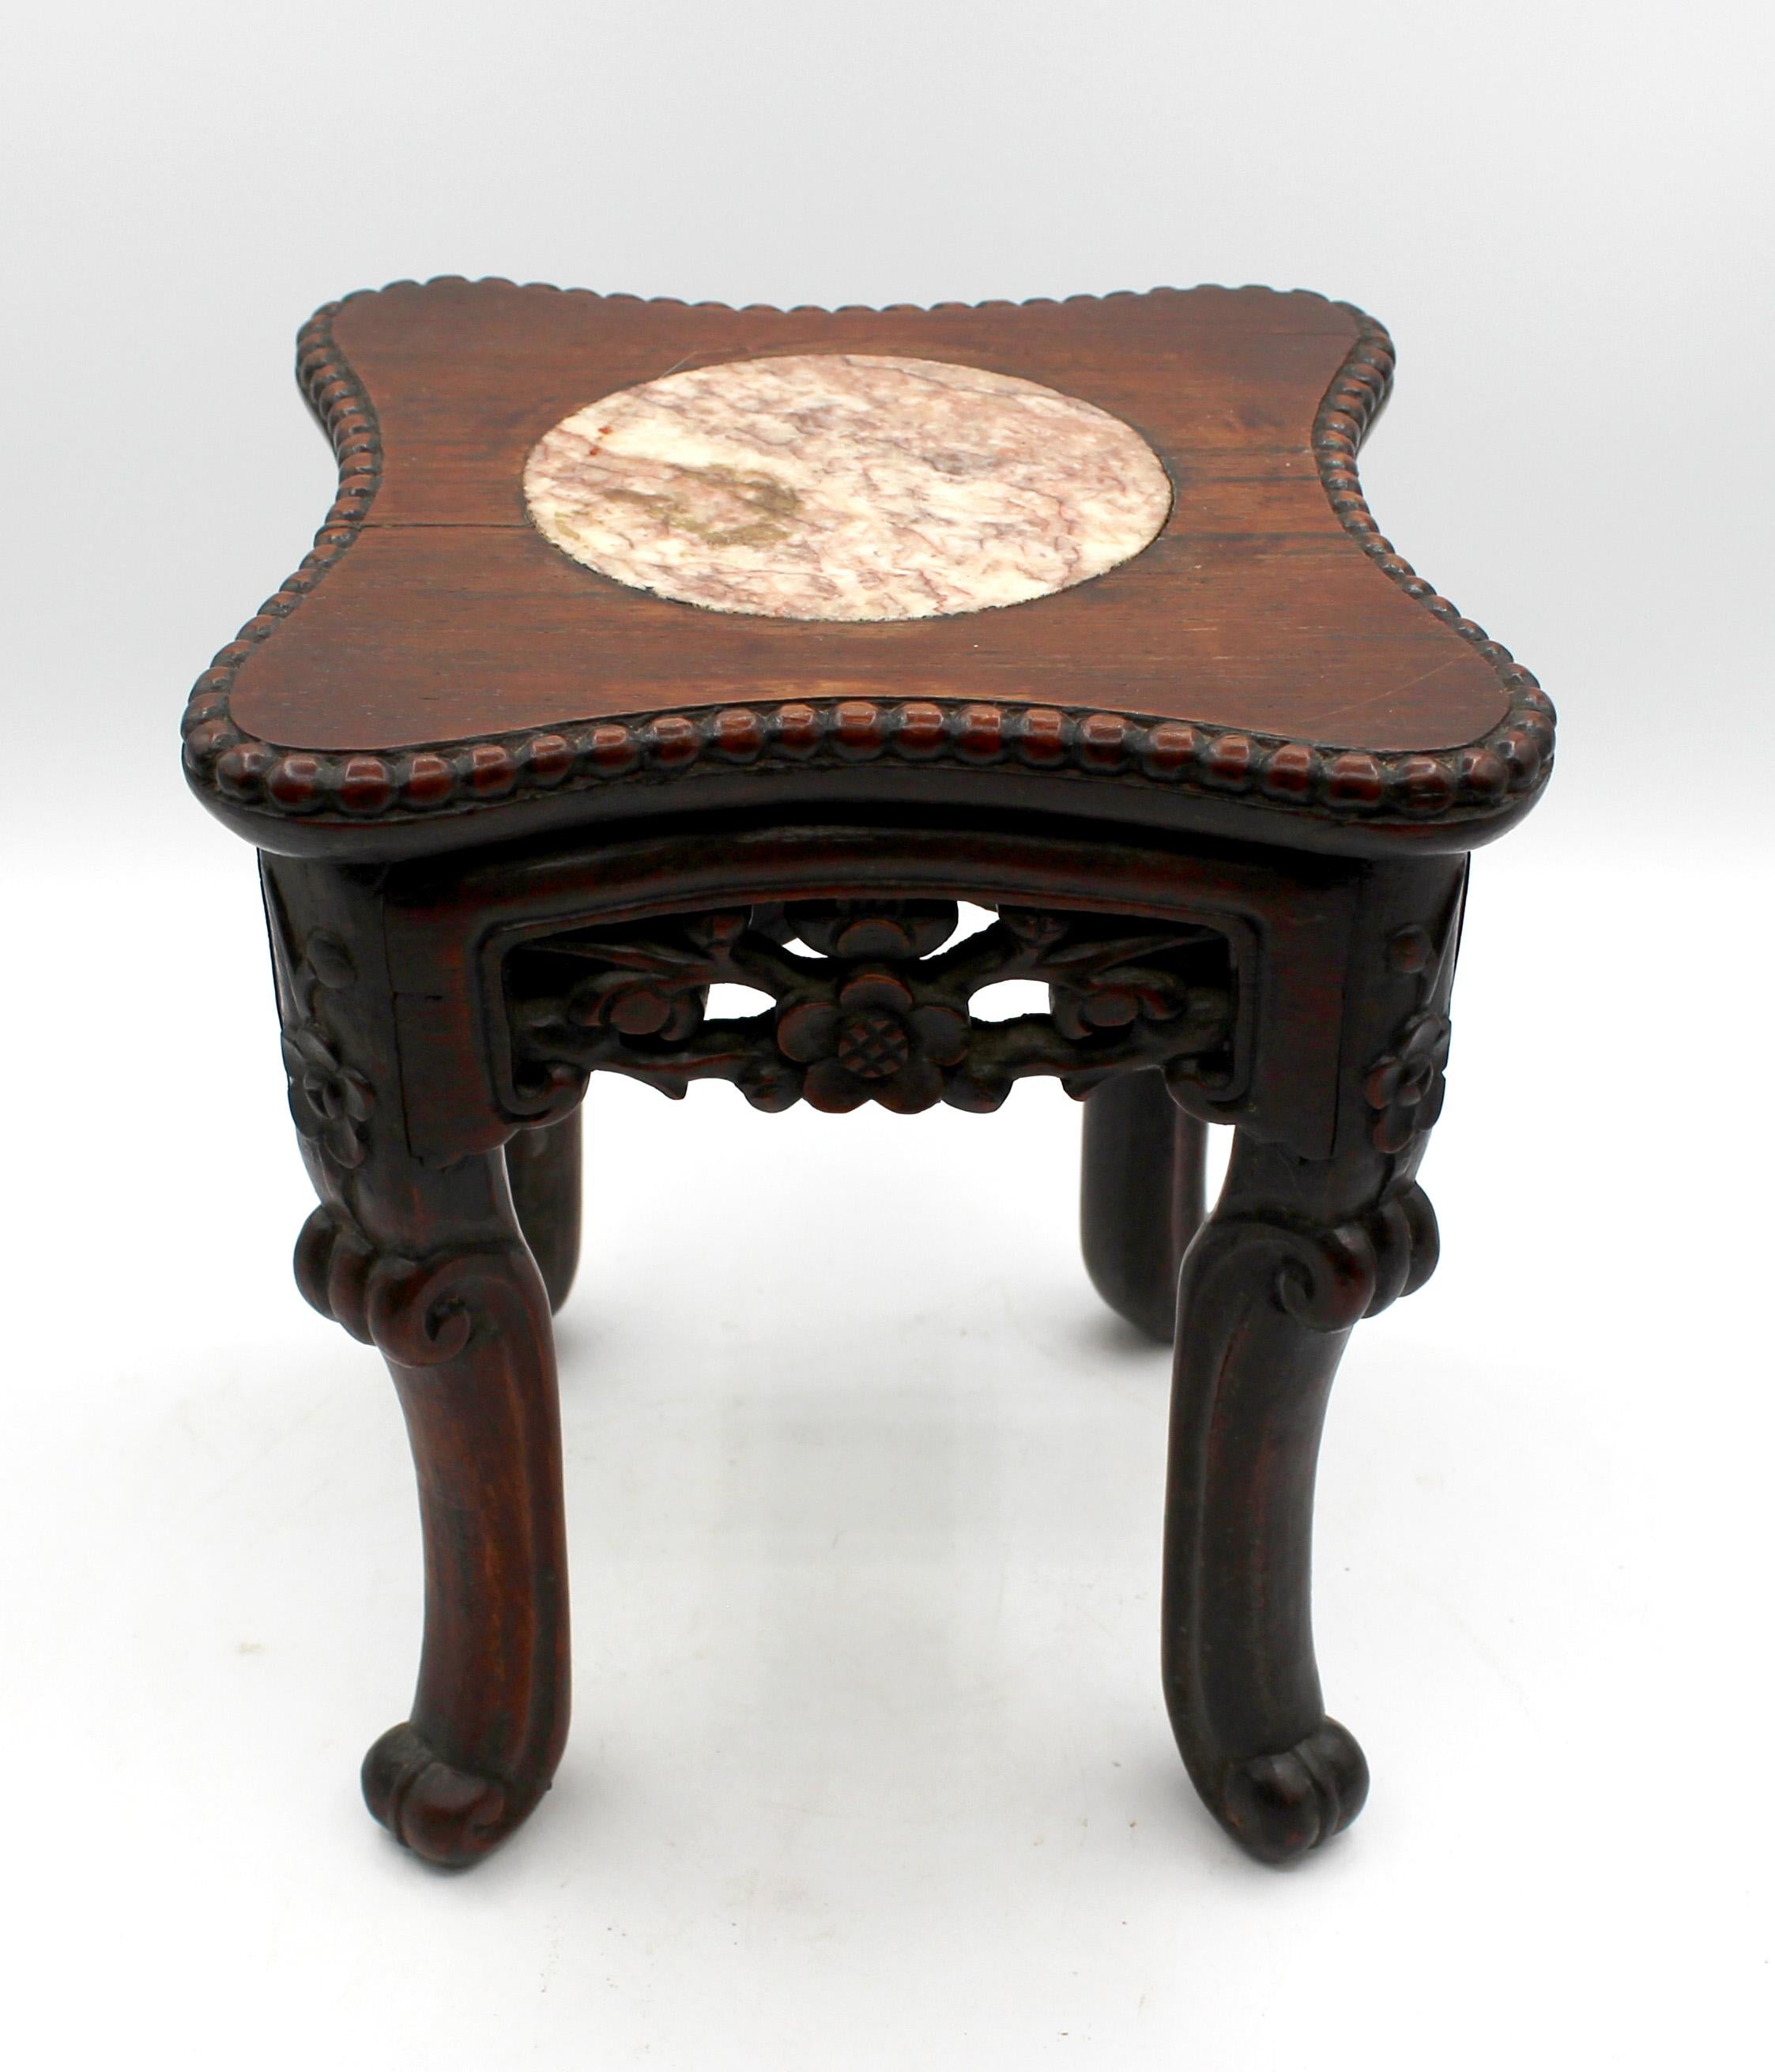 3rd quarter 19th century miniature taboret table, Chinese export. Top inset with pink marble. Prunus carved aprons. Scrolled legs & beaded edge. Rosewood. 7 3/8